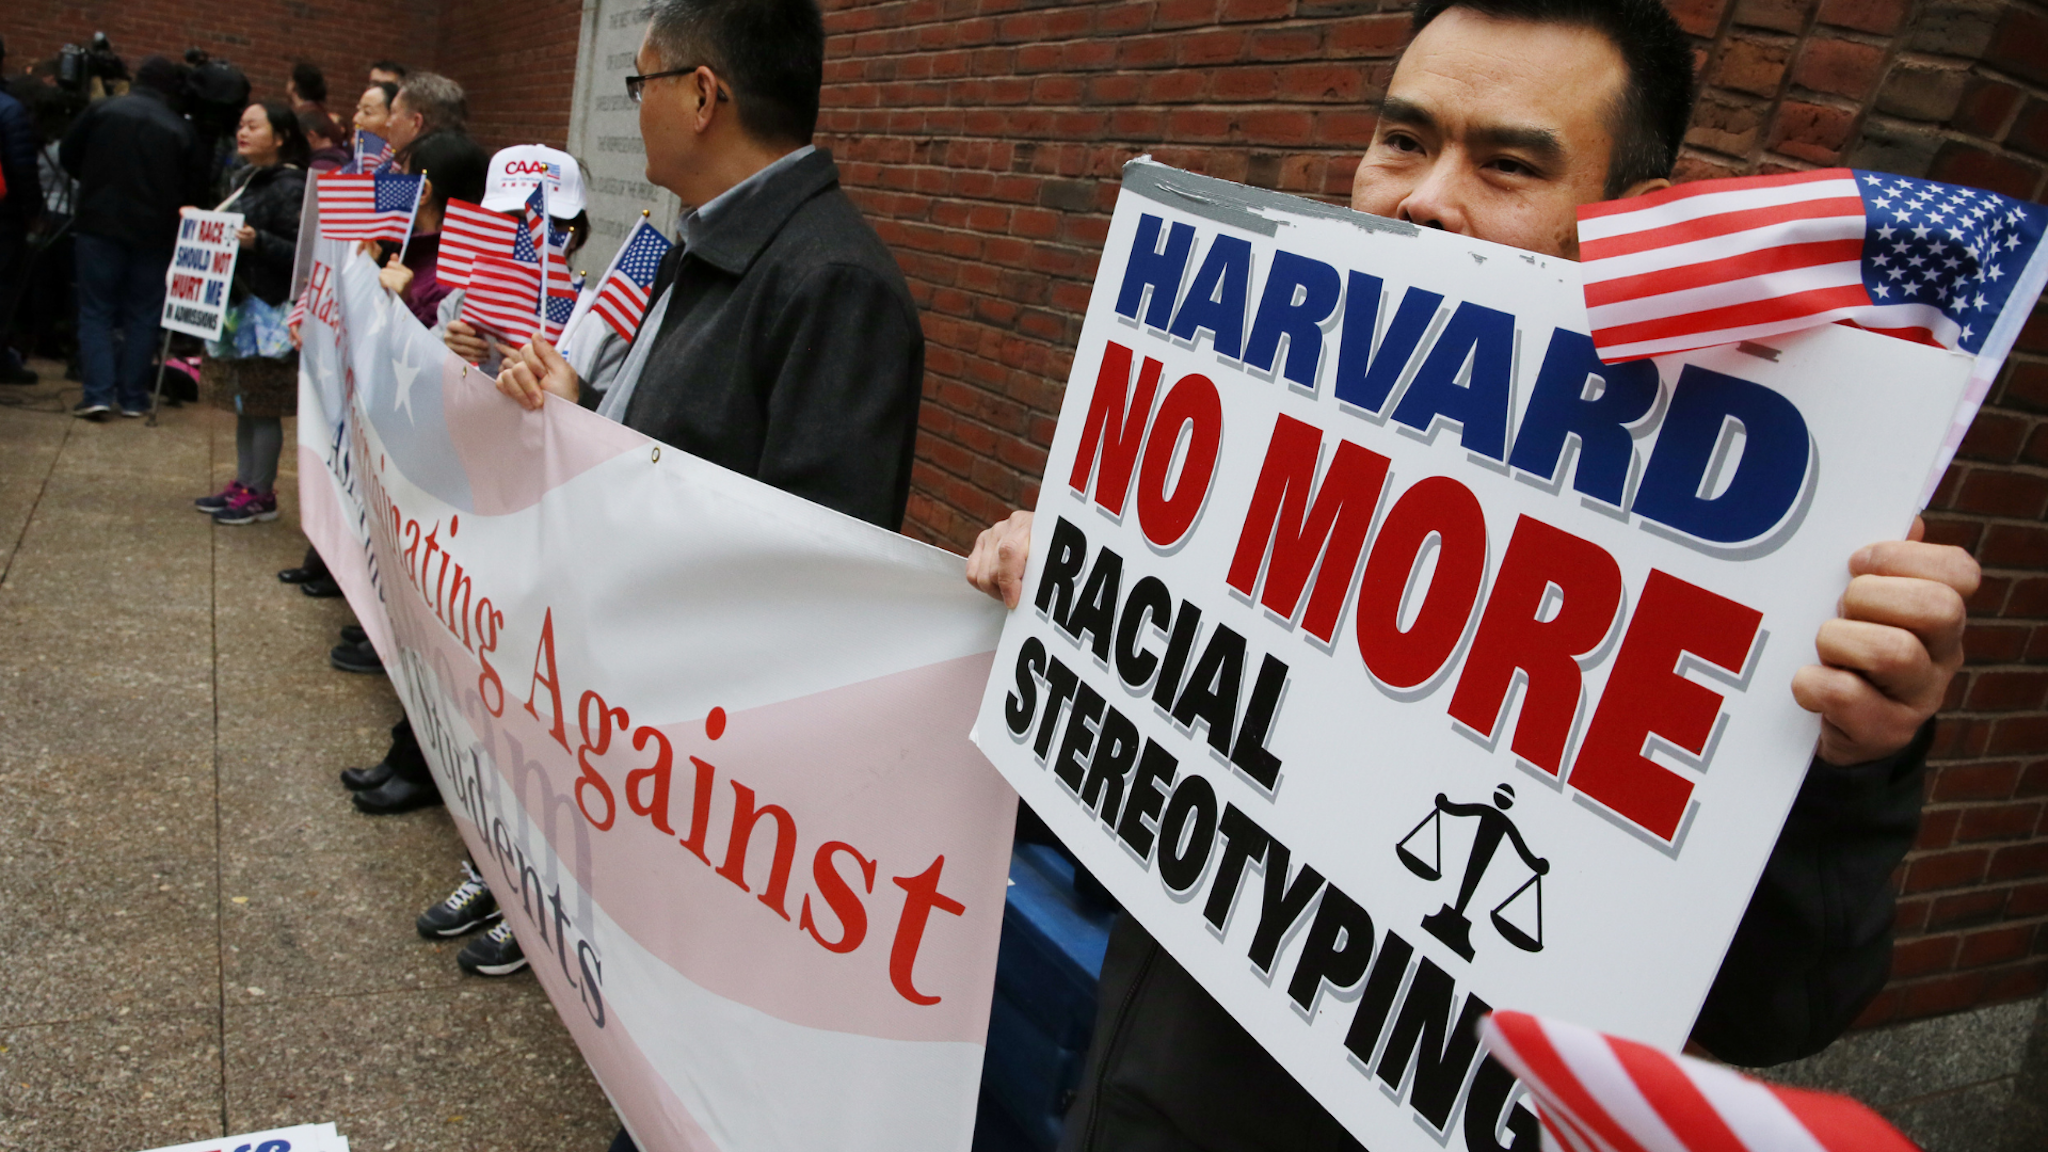 Jia Wu joins protestors during a press conference held by Harvard attorneys following closing arguments in the Harvard admissions trial at the the John Joseph Moakley United States Courthouse in Boston on Nov. 2, 2018. Harvard University quietly changed significant portions of its training manual for admissions officers this year, addressing some of the key issues at the heart of an ongoing federal trial over whether the school discriminates against Asian-American applicants.